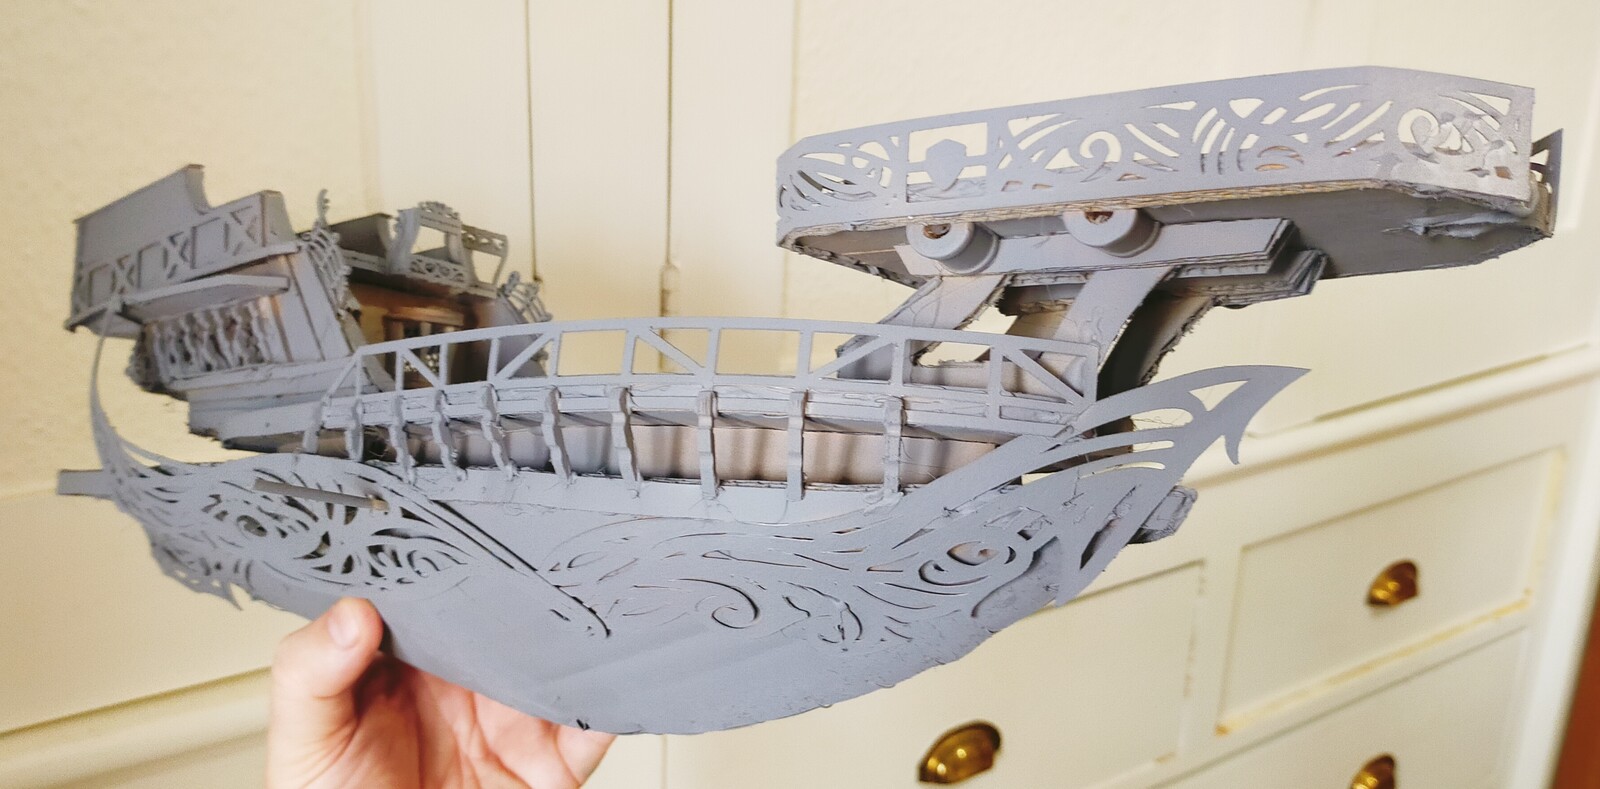 And the part primed hull and fighting platforms now all the same colour and looking more like a unified ship design.